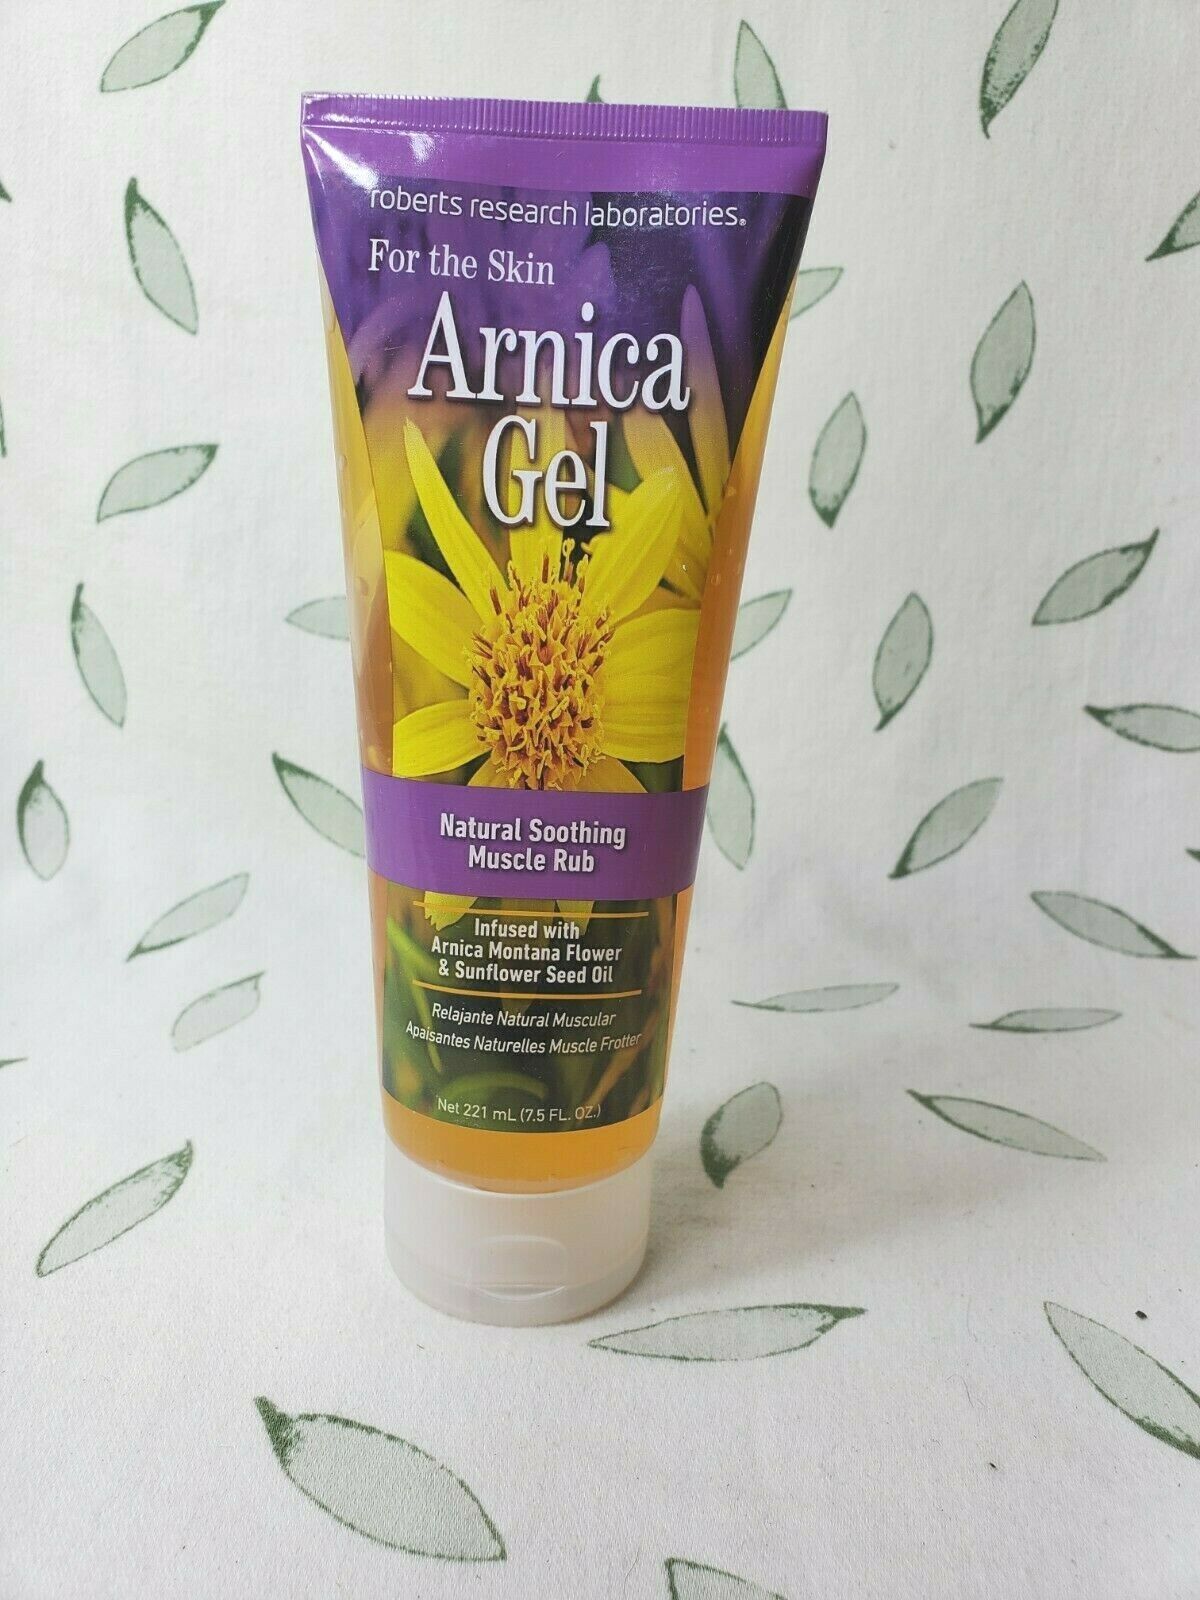 Arnica Gel Soothing Muscle Rub by Roberts Research Laboratories 7.5 Fl.Oz.